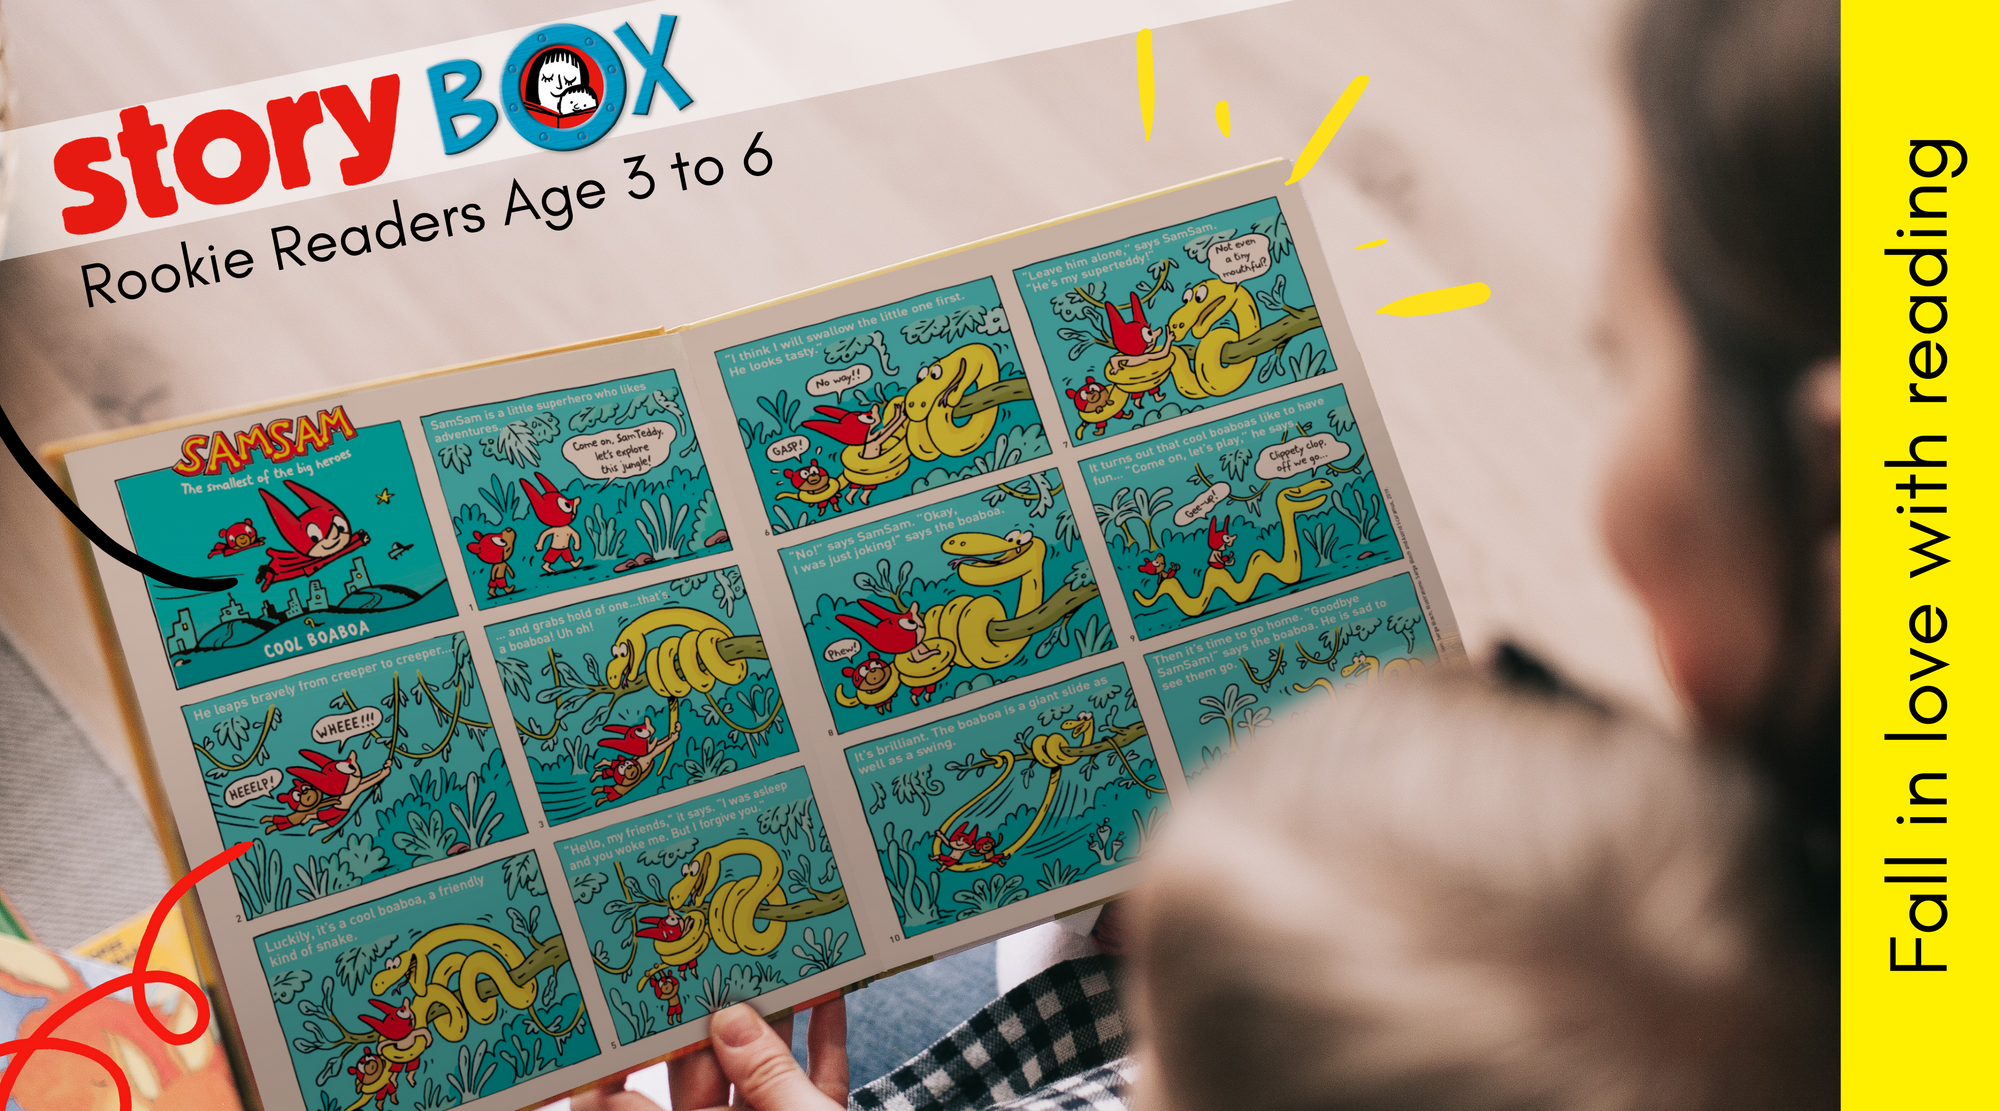 StoryBox magazine for Kids from 3 to 6 years old